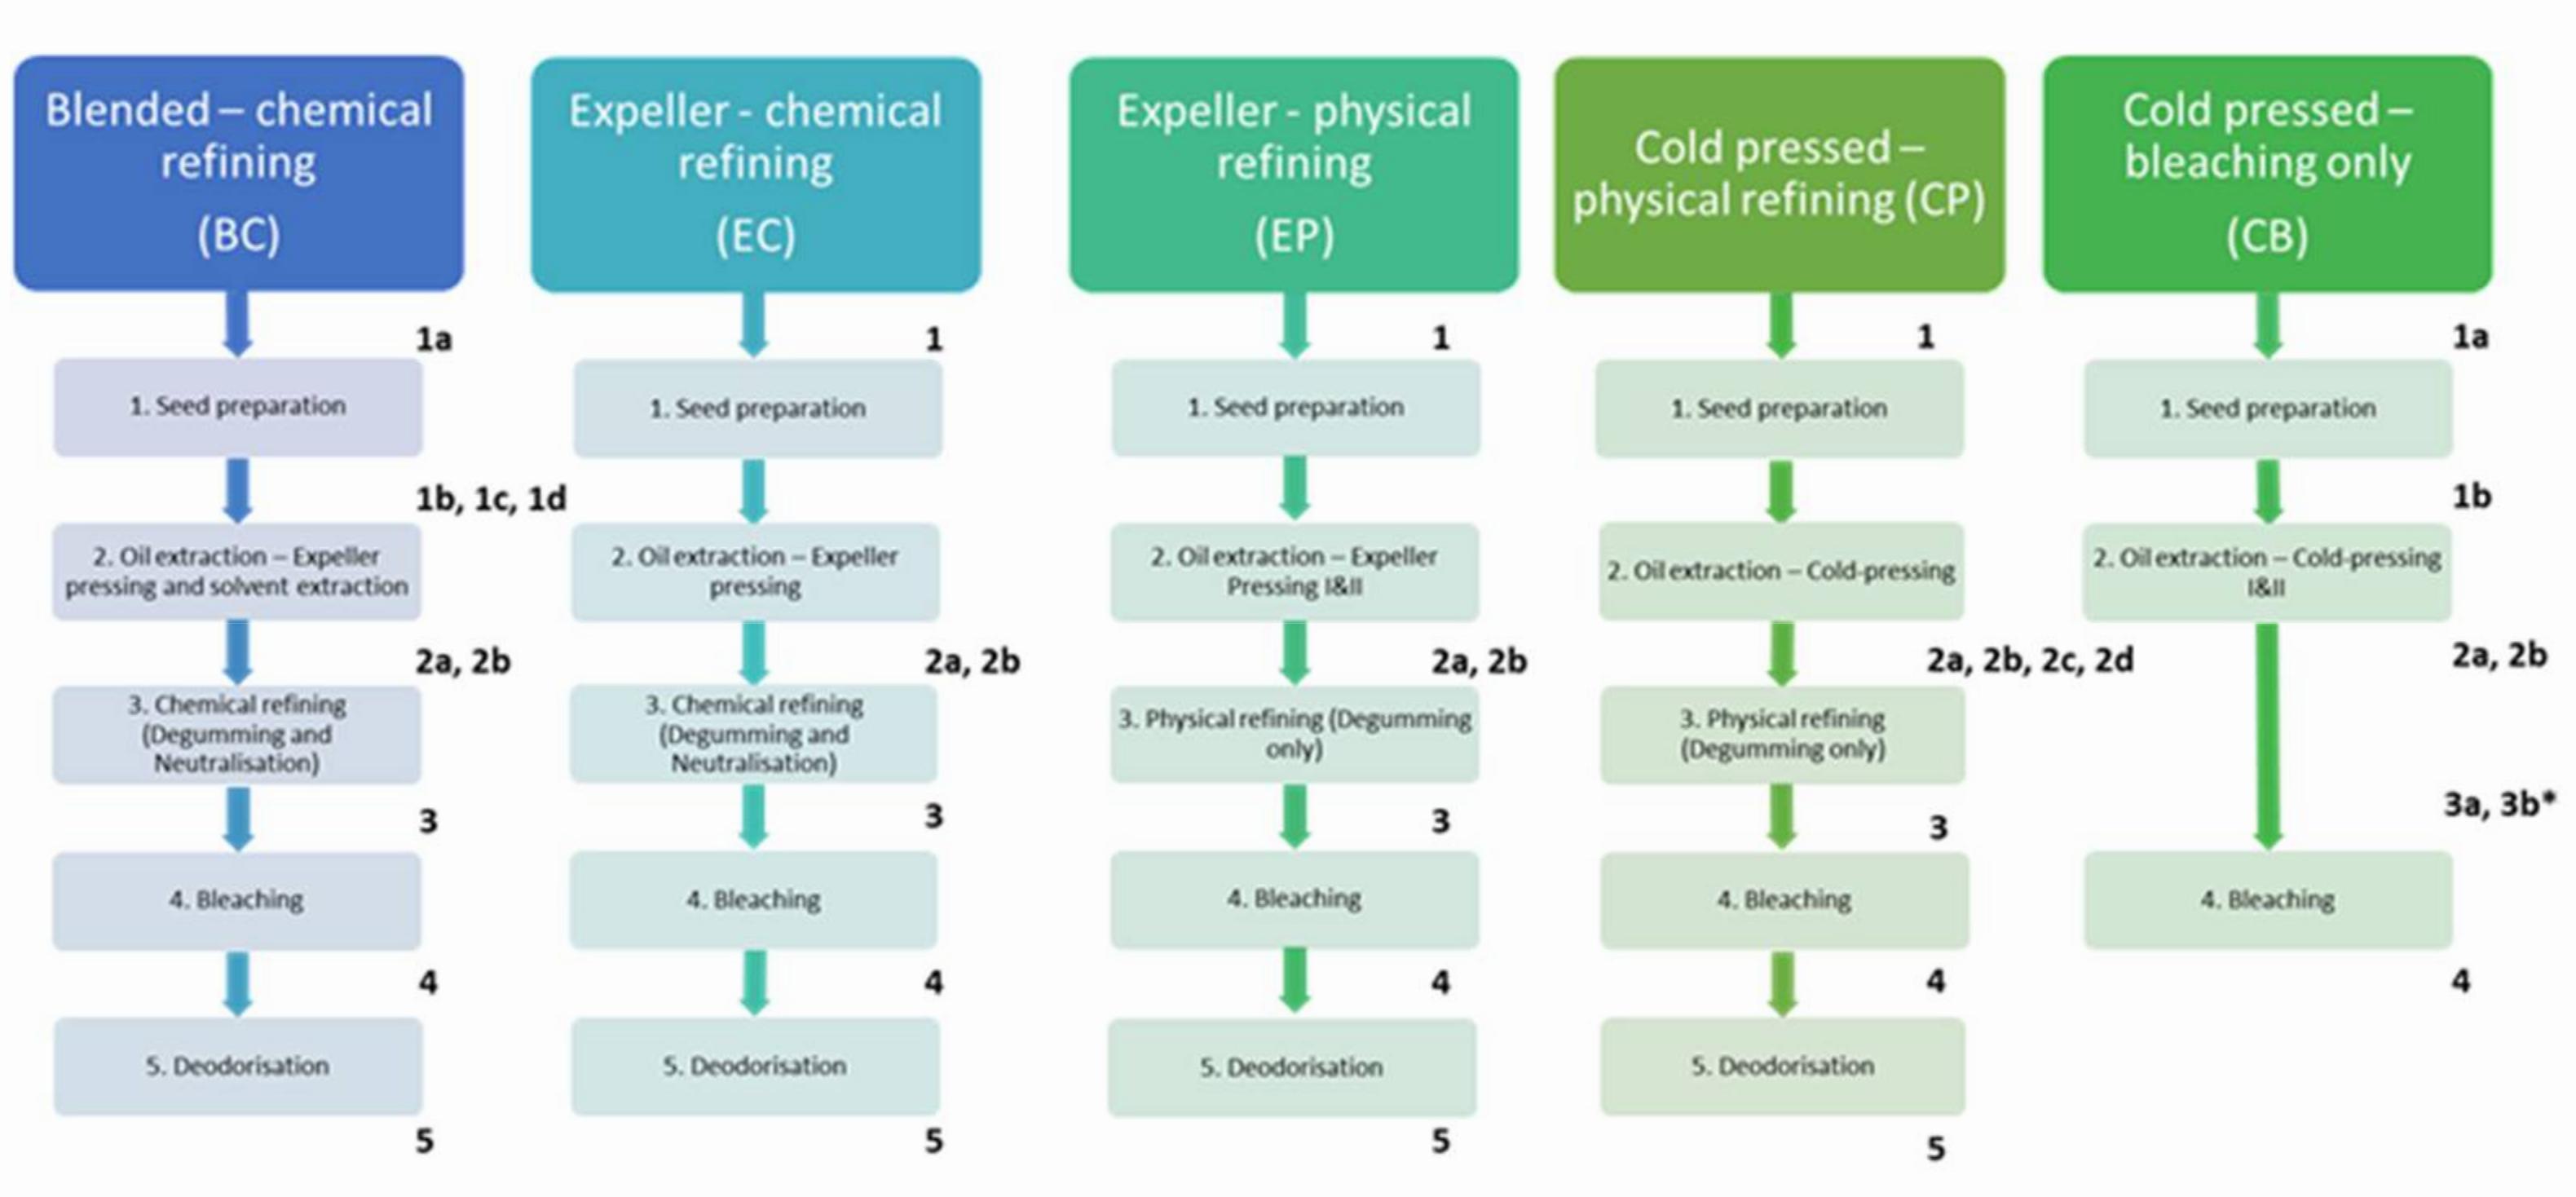 A chart of the different processes involved in five different vegetable oil refining methods.